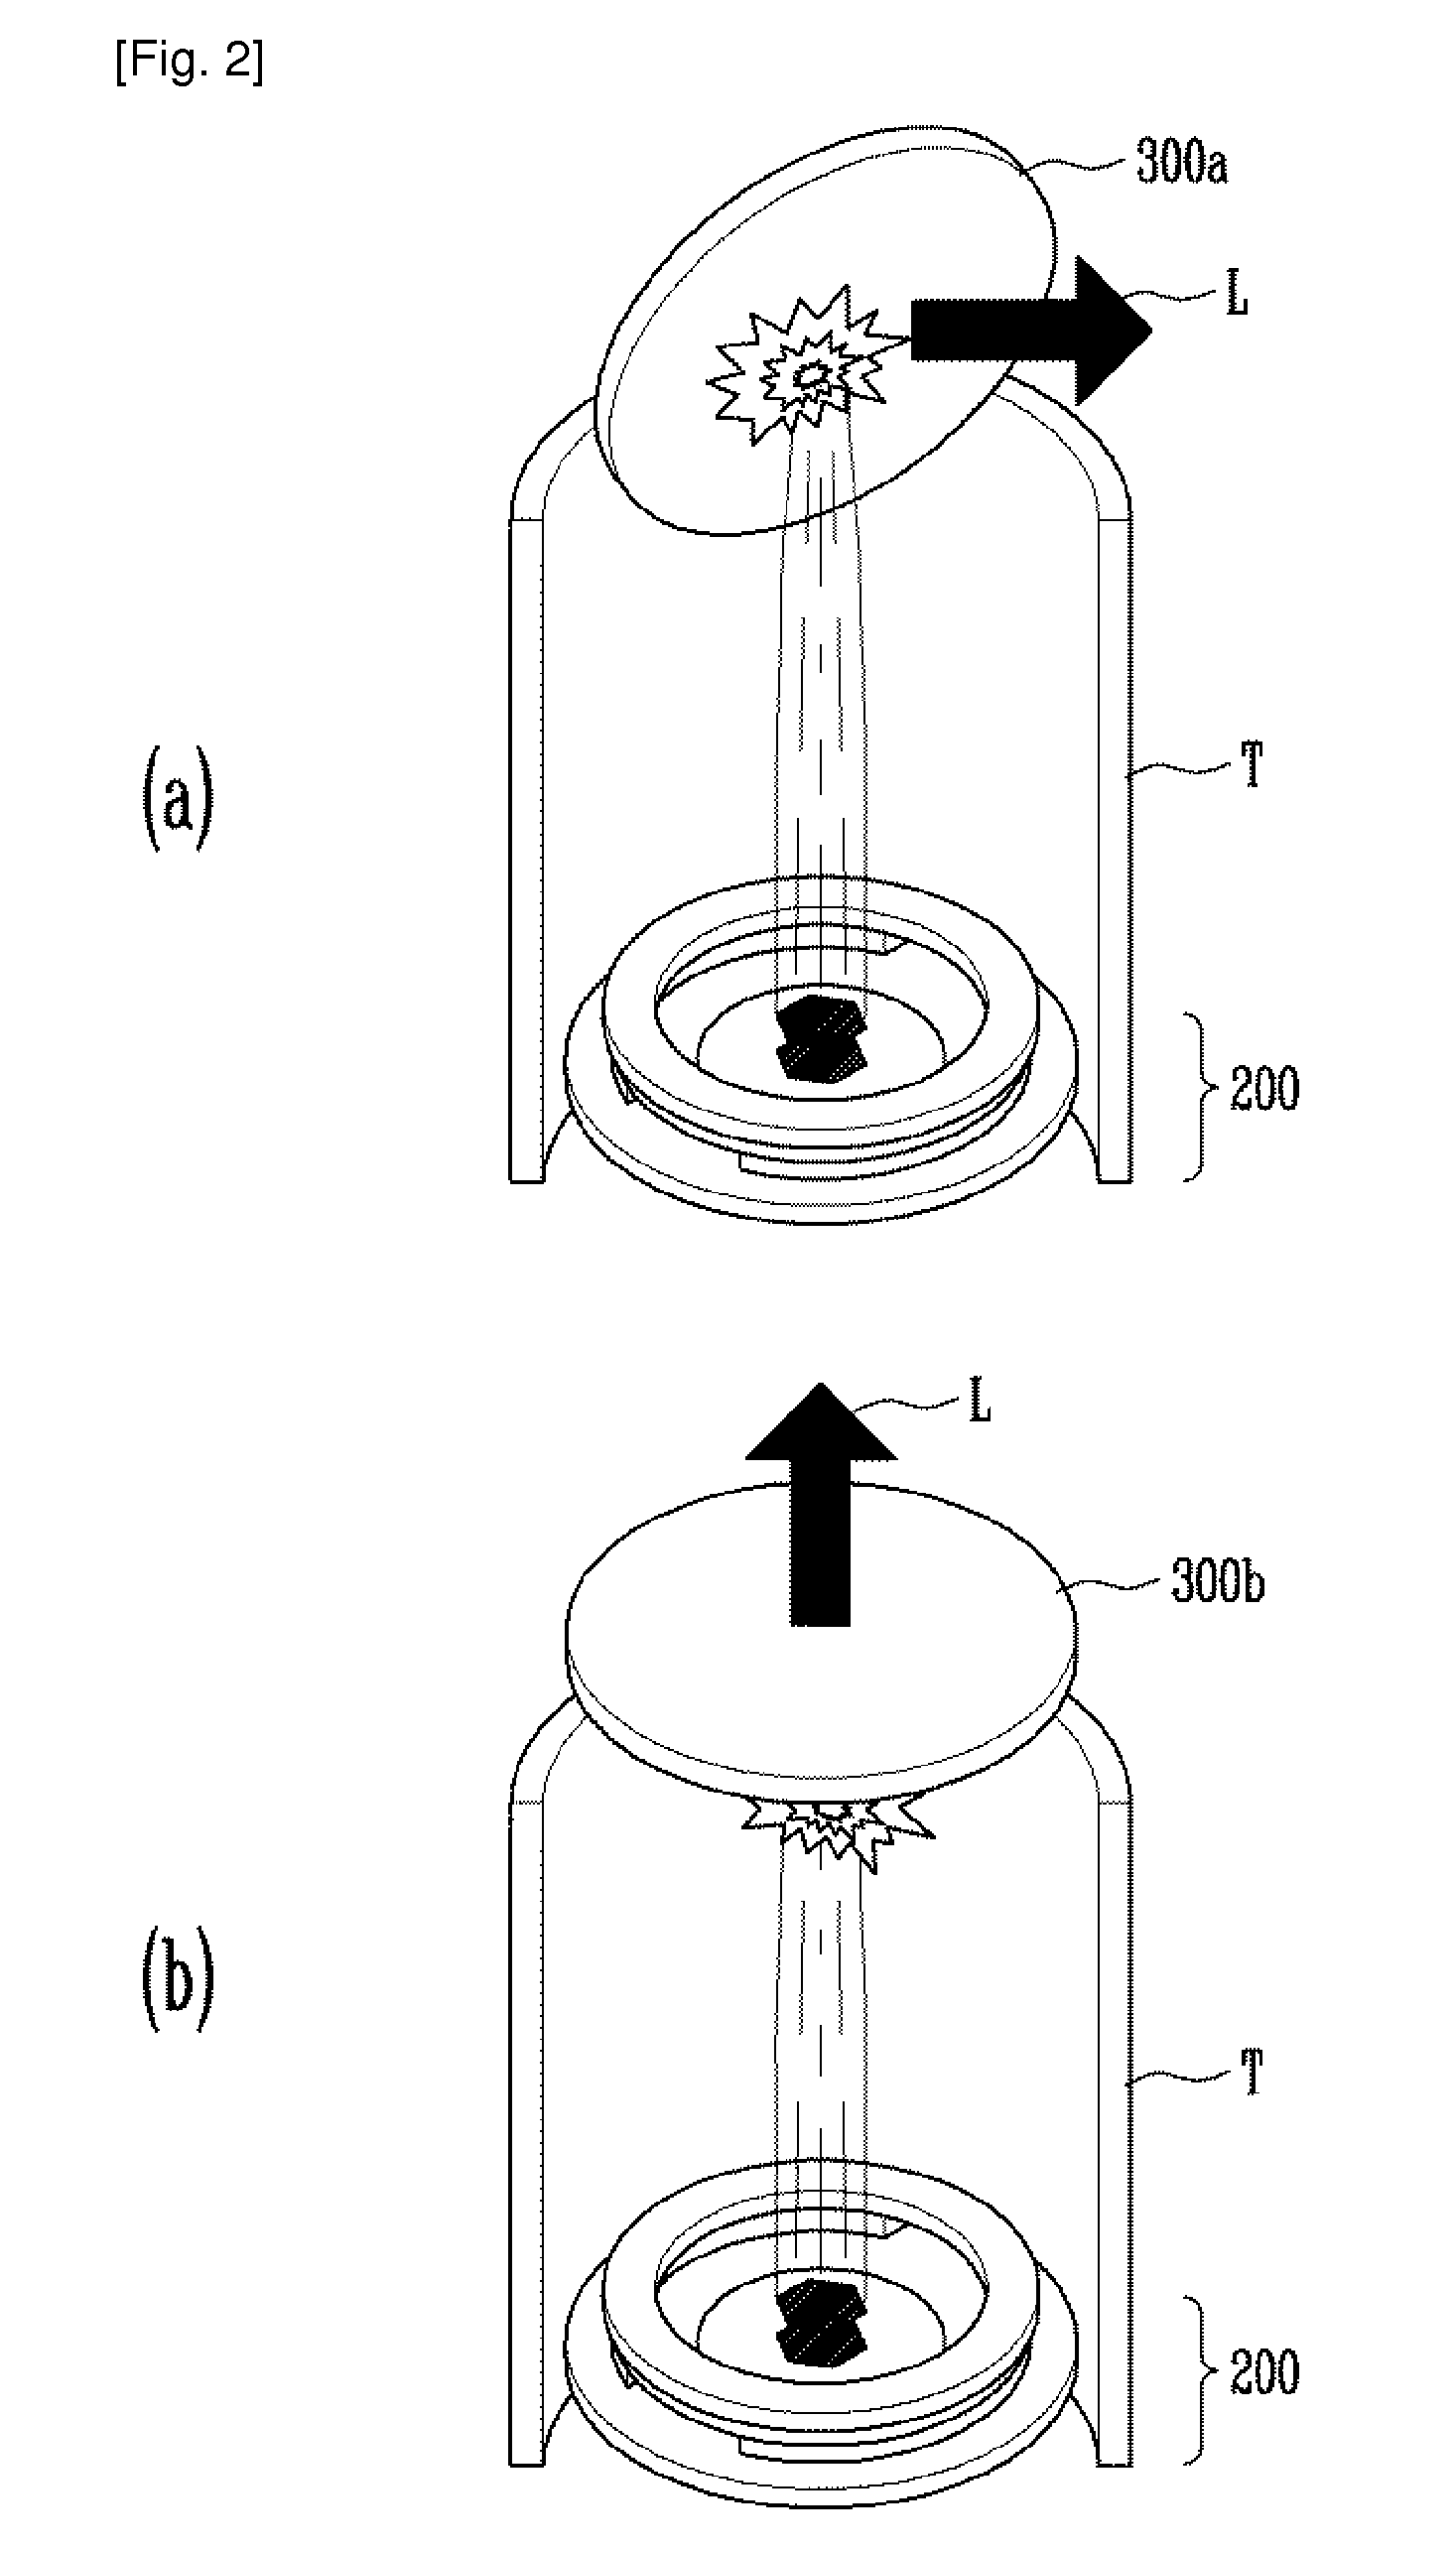 Microminiature x-ray tube with triode structure using a NANO emitter